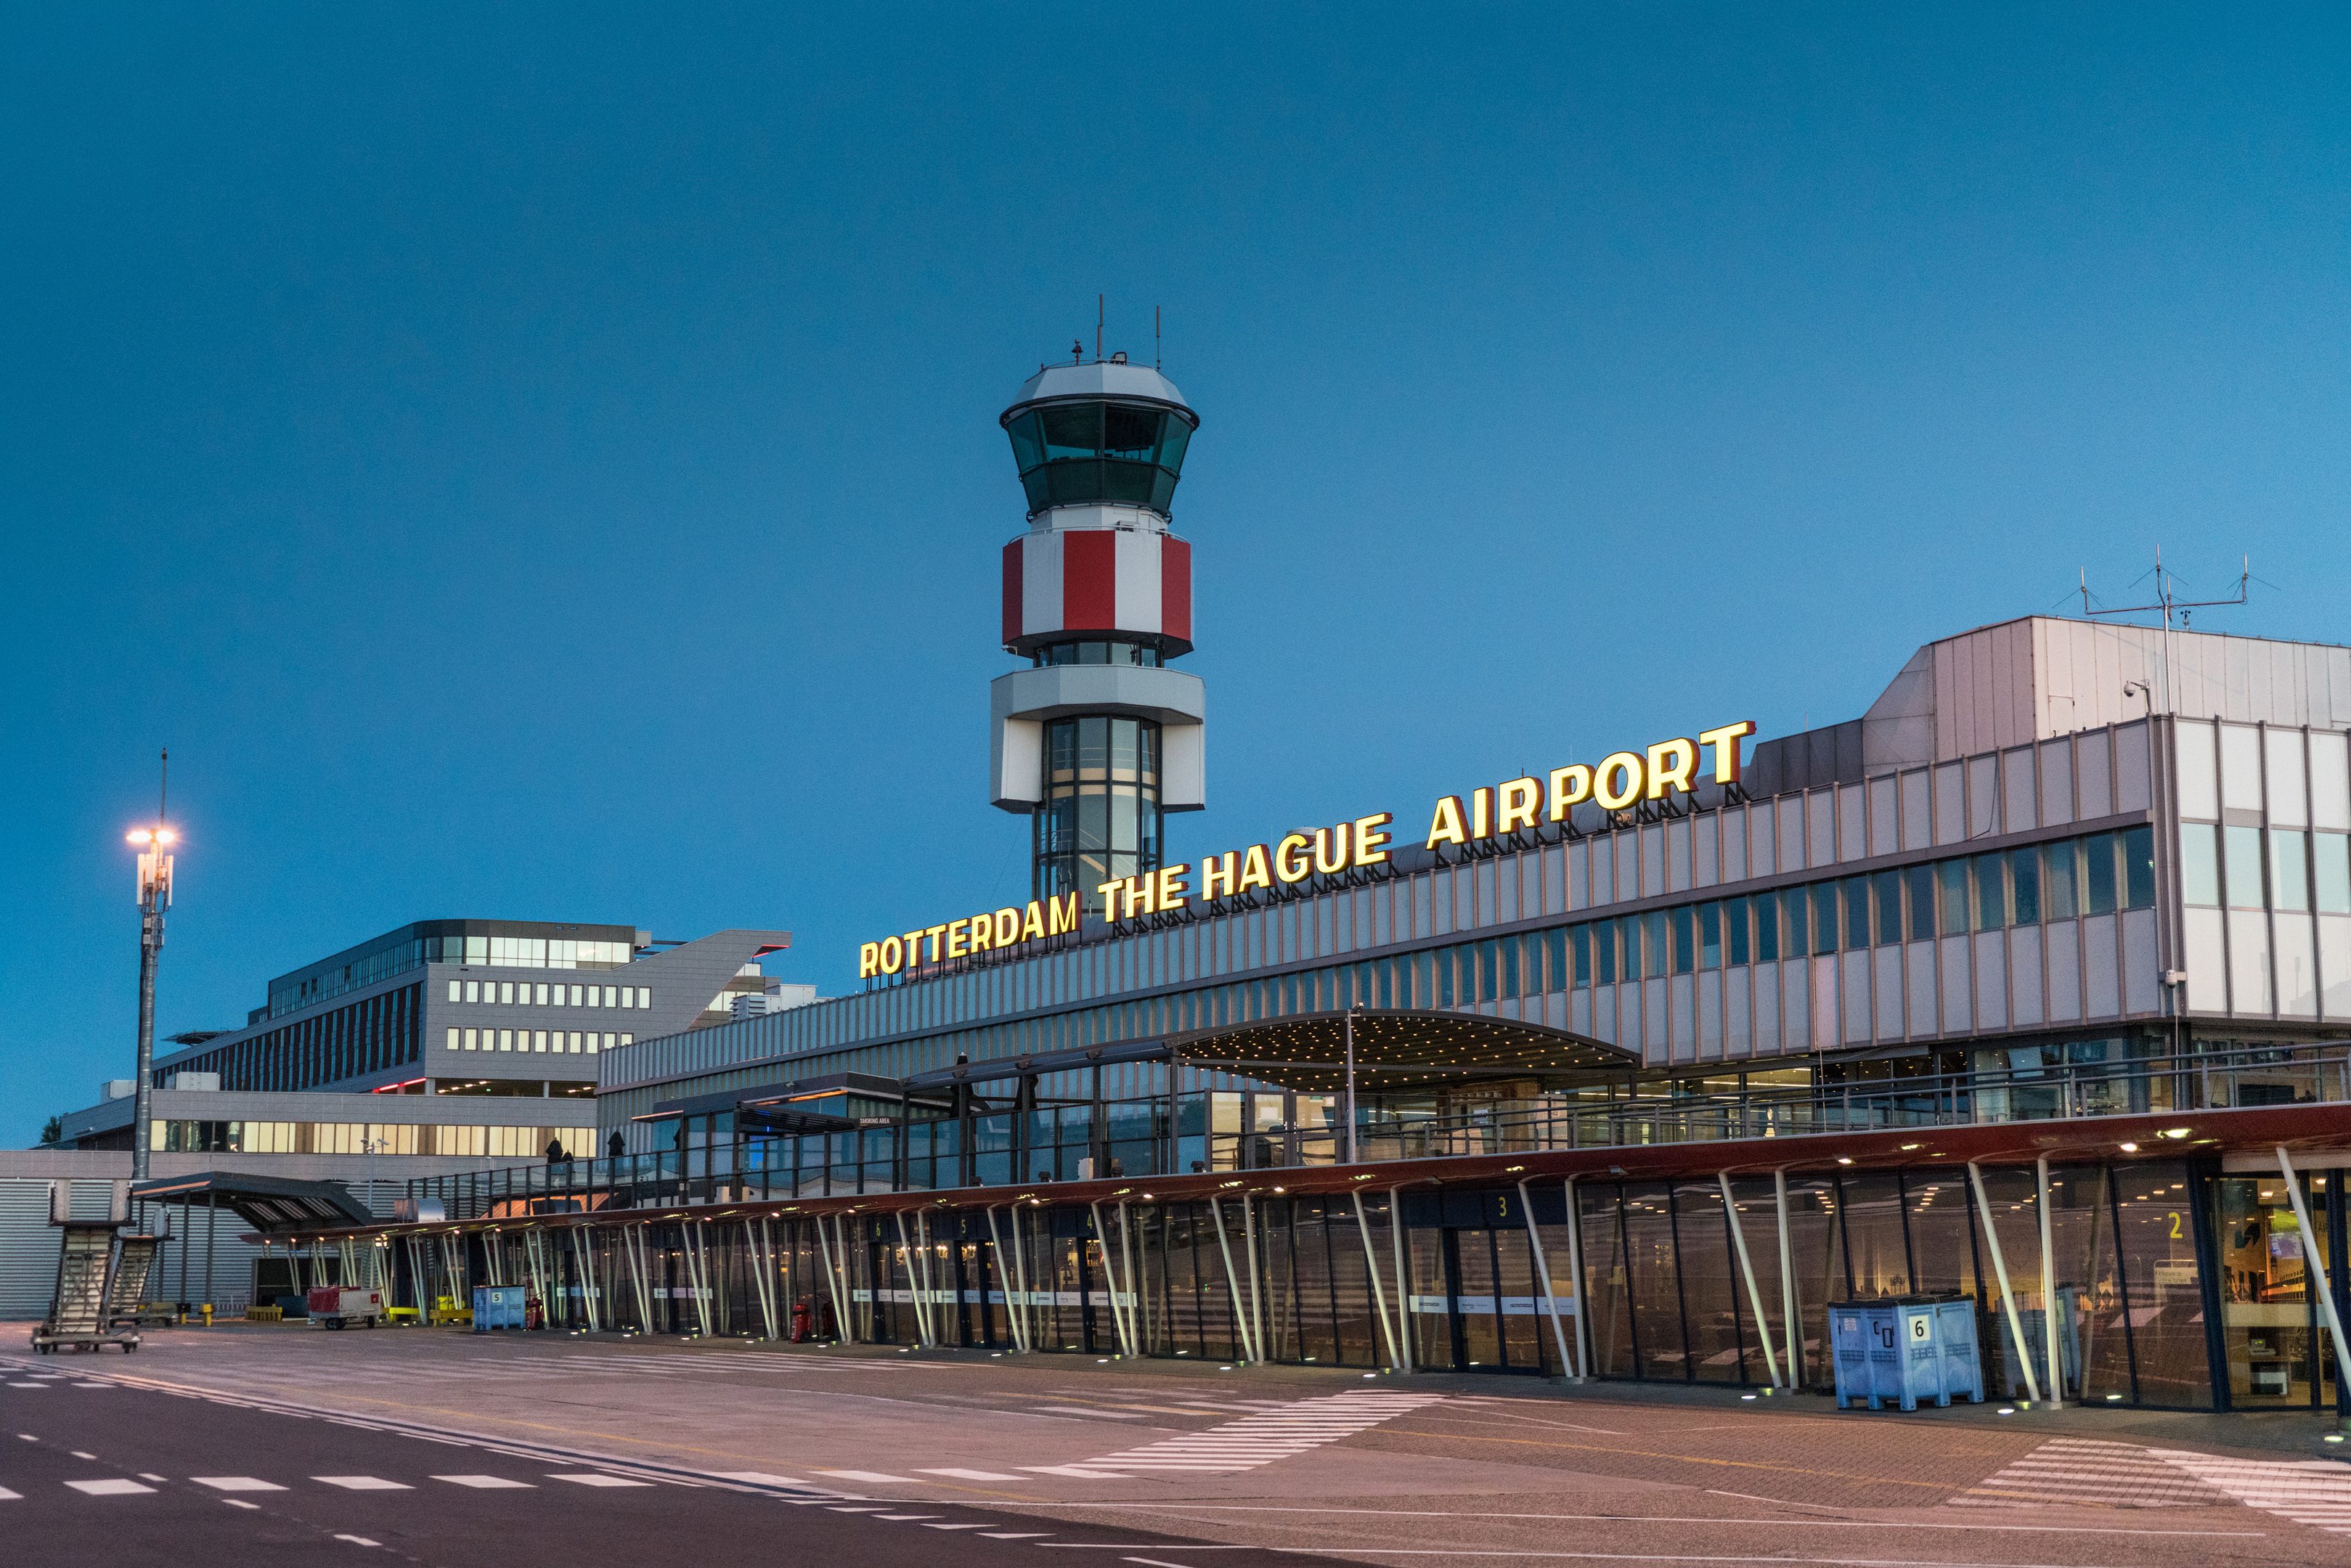 Dutch airports such as Rotterdam The Hague Airport are going 100% renewable in 2018.